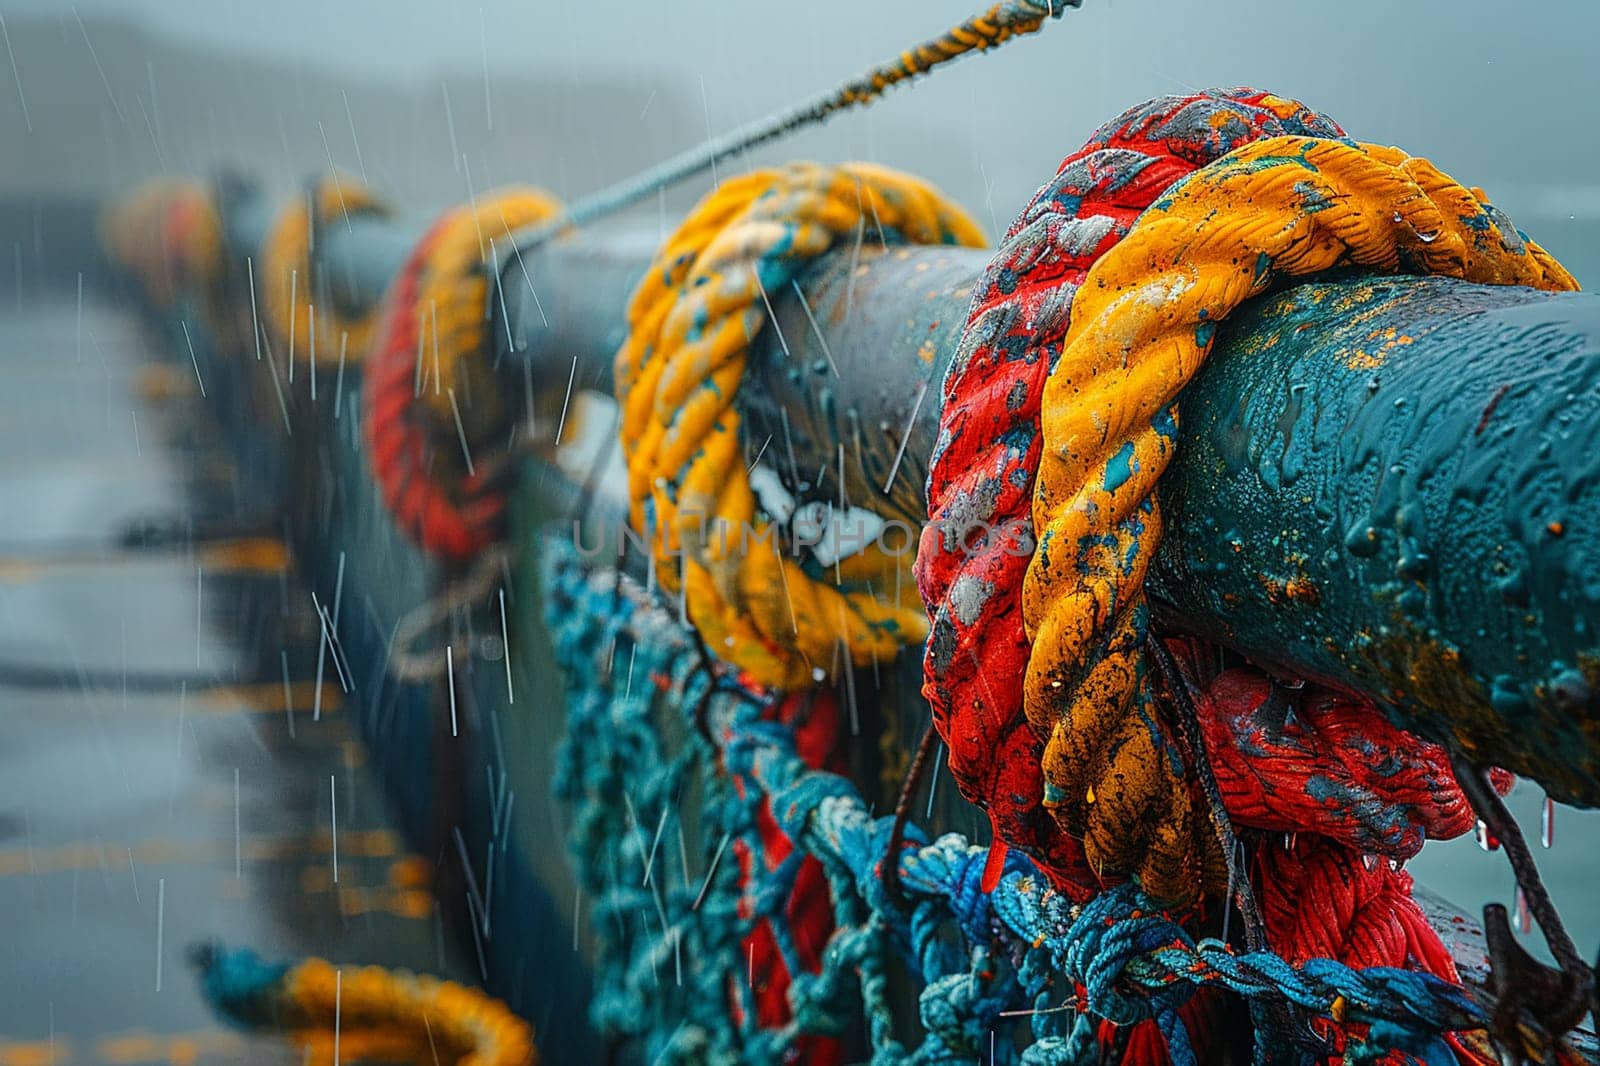 Tangled Fishing Nets Drying on a Seaside Wharf, The nets blur with the docks, tales of the sea caught in their weaves.